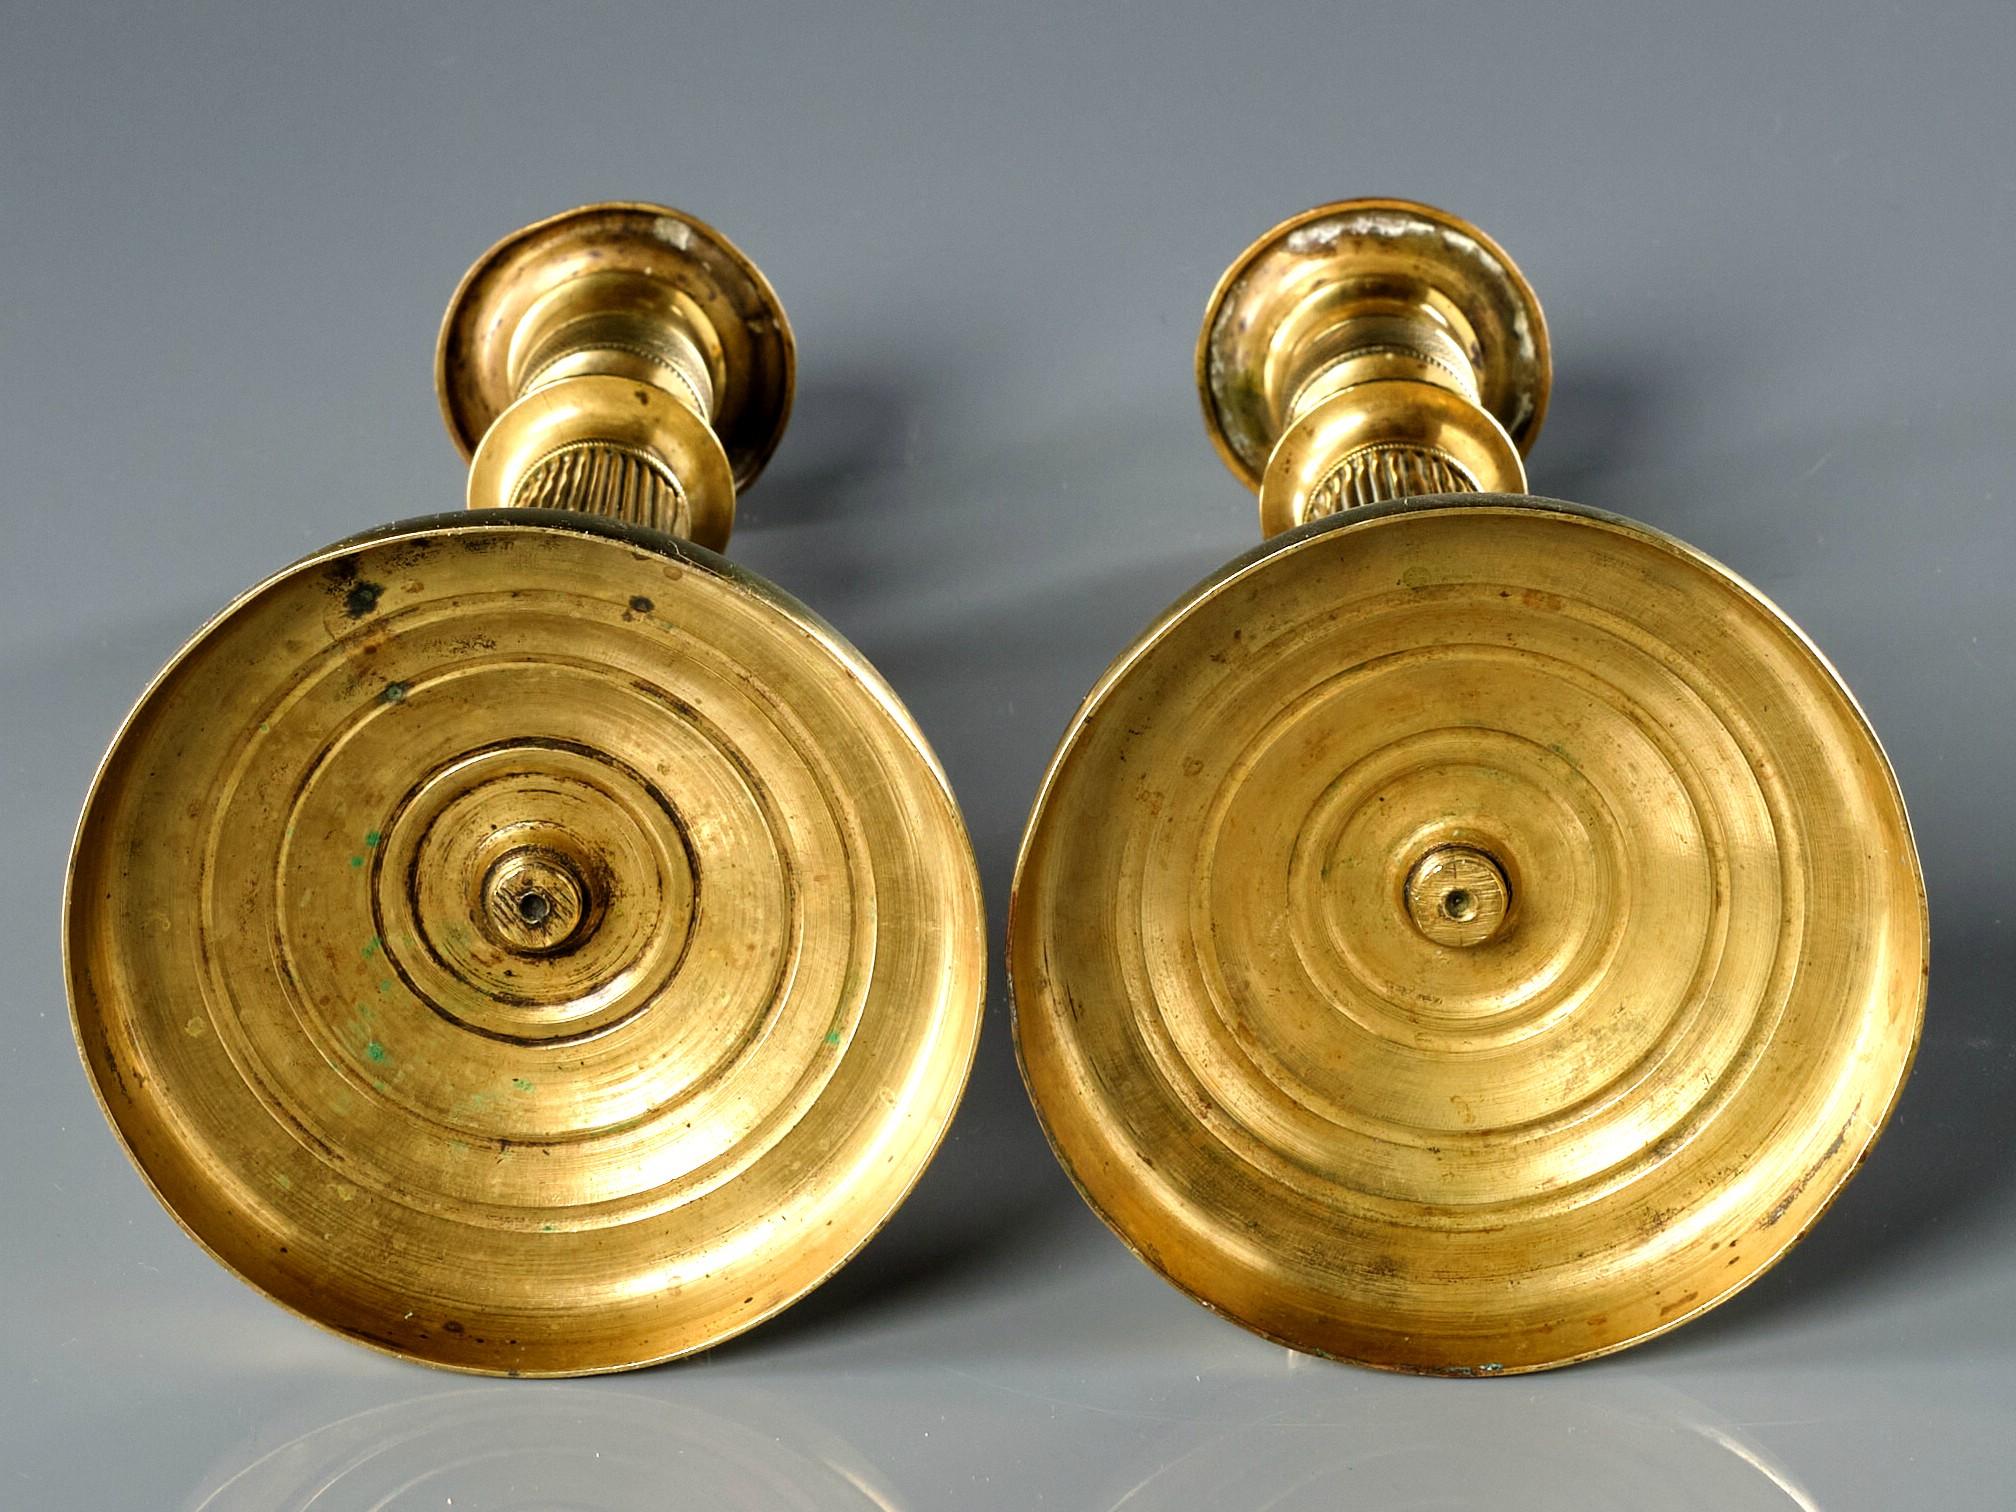 Very Handsome Pair of French Empire Period Gilt Brass Candlesticks, Circa 1820 For Sale 1